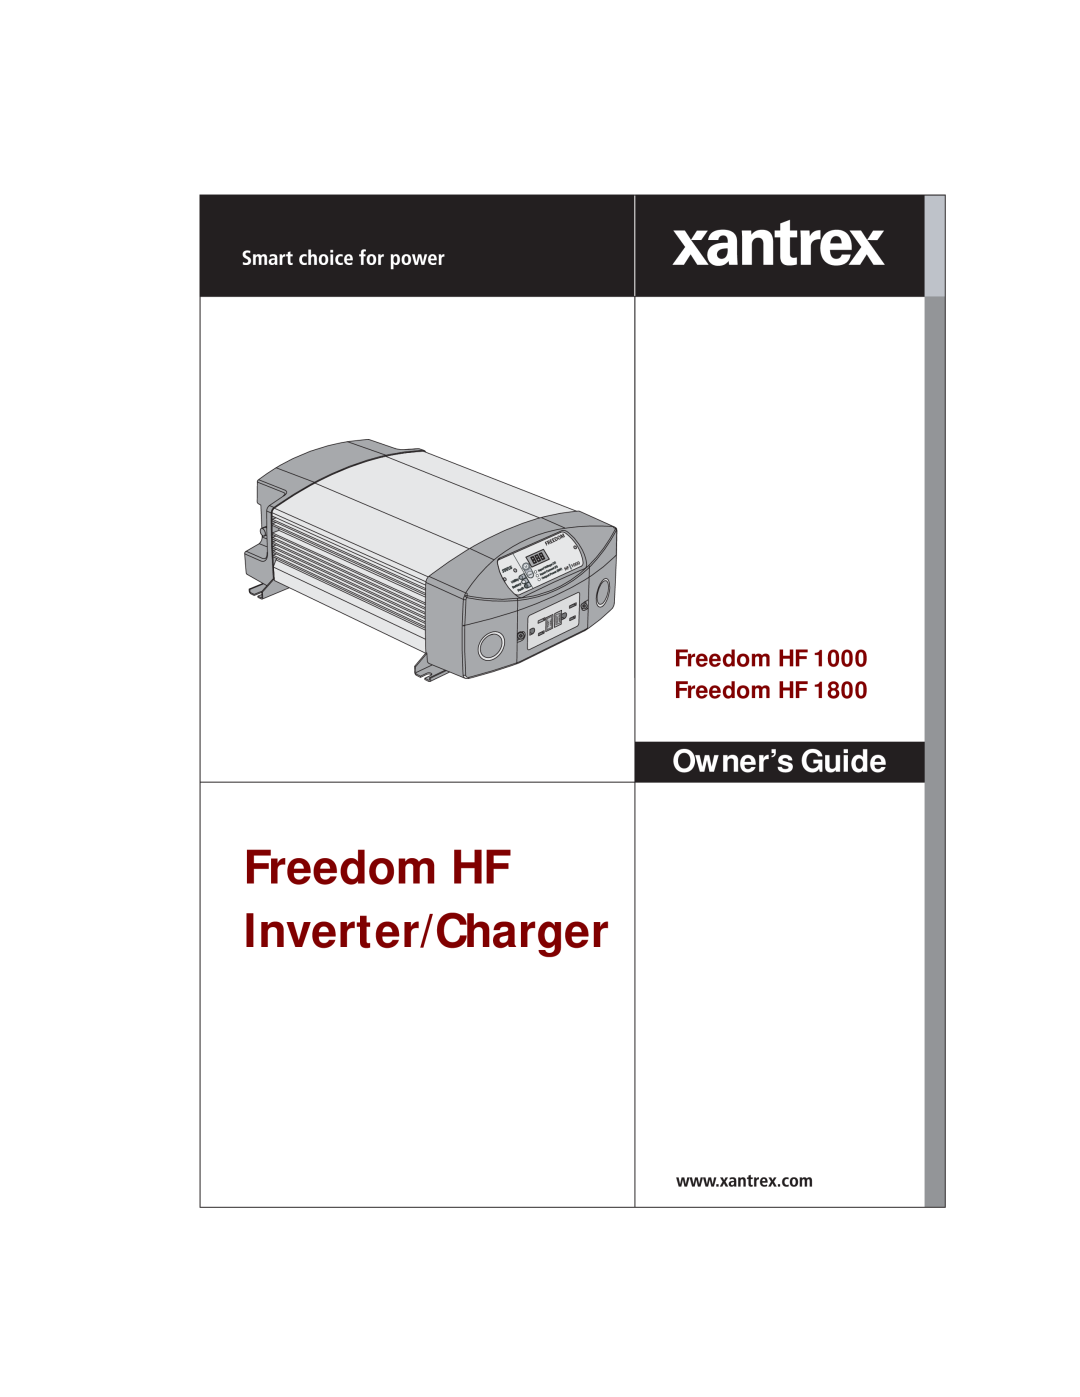 Xantrex Technology HF 1800, HF 1000 manual Freedom HF, Inverter/Charger, Owner’s Guide 